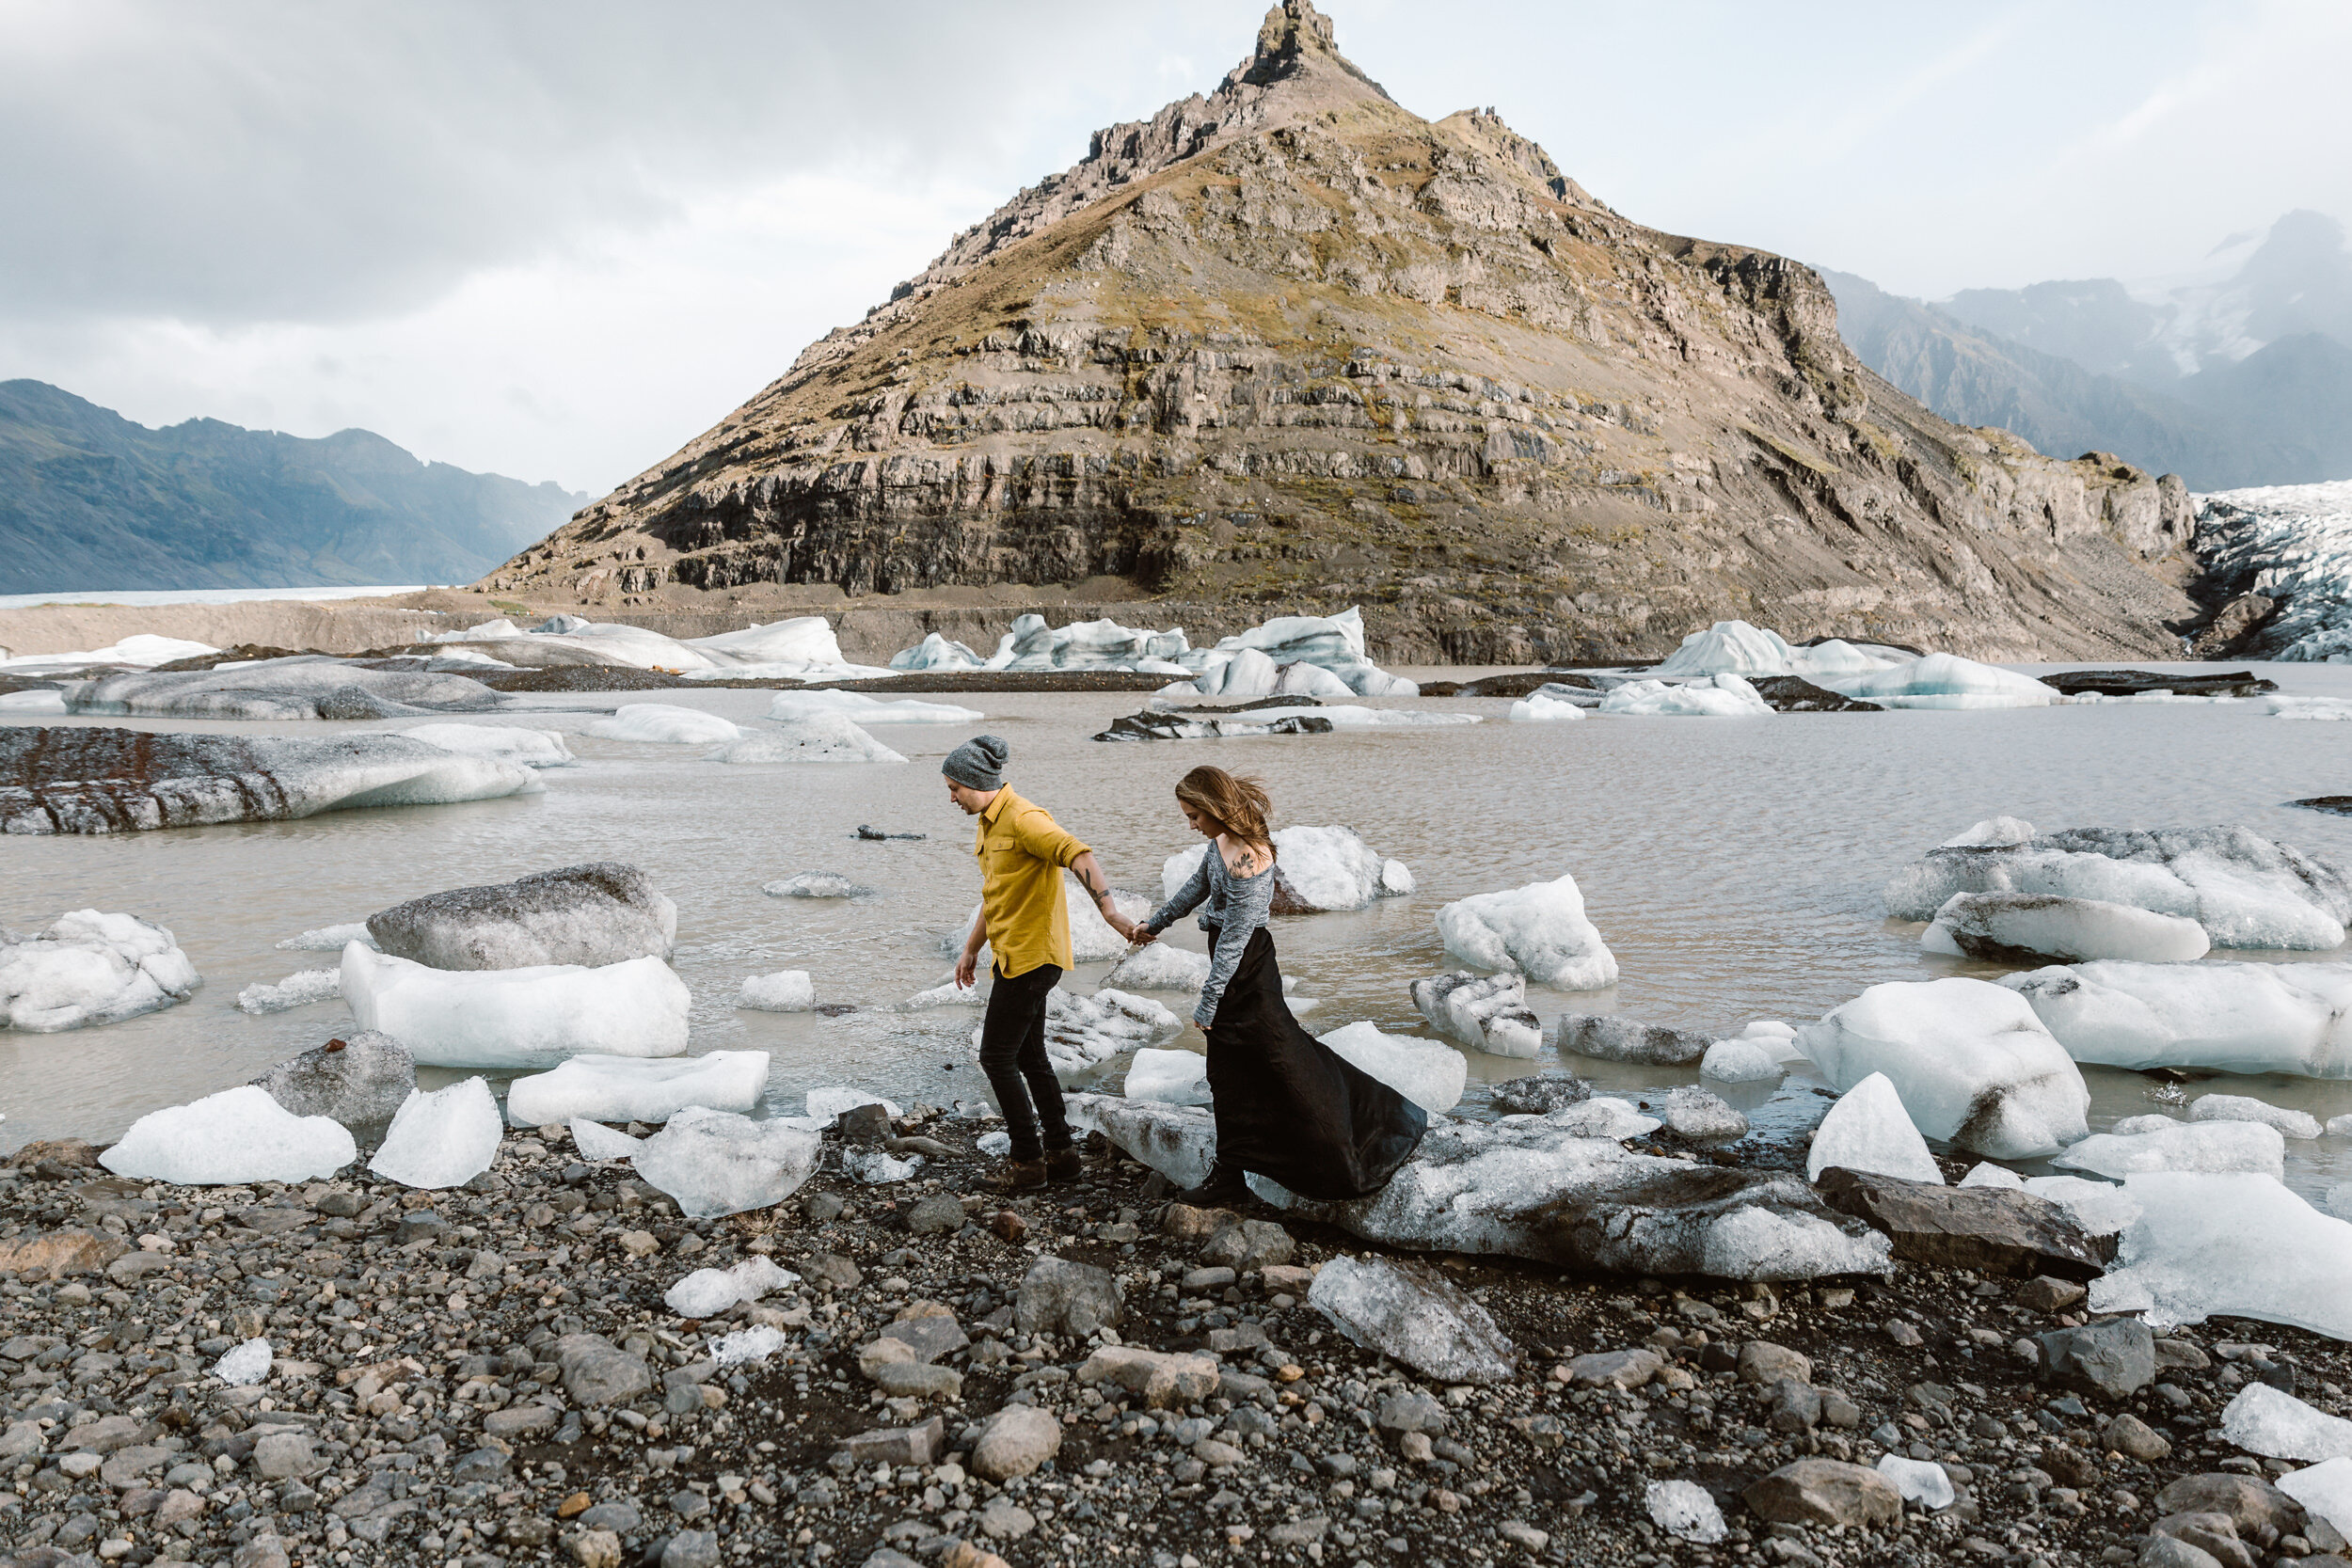 Adventure Session with The Hearnes in Iceland | Exploring a Glacier Lake | Epic Wedding Locations in Iceland